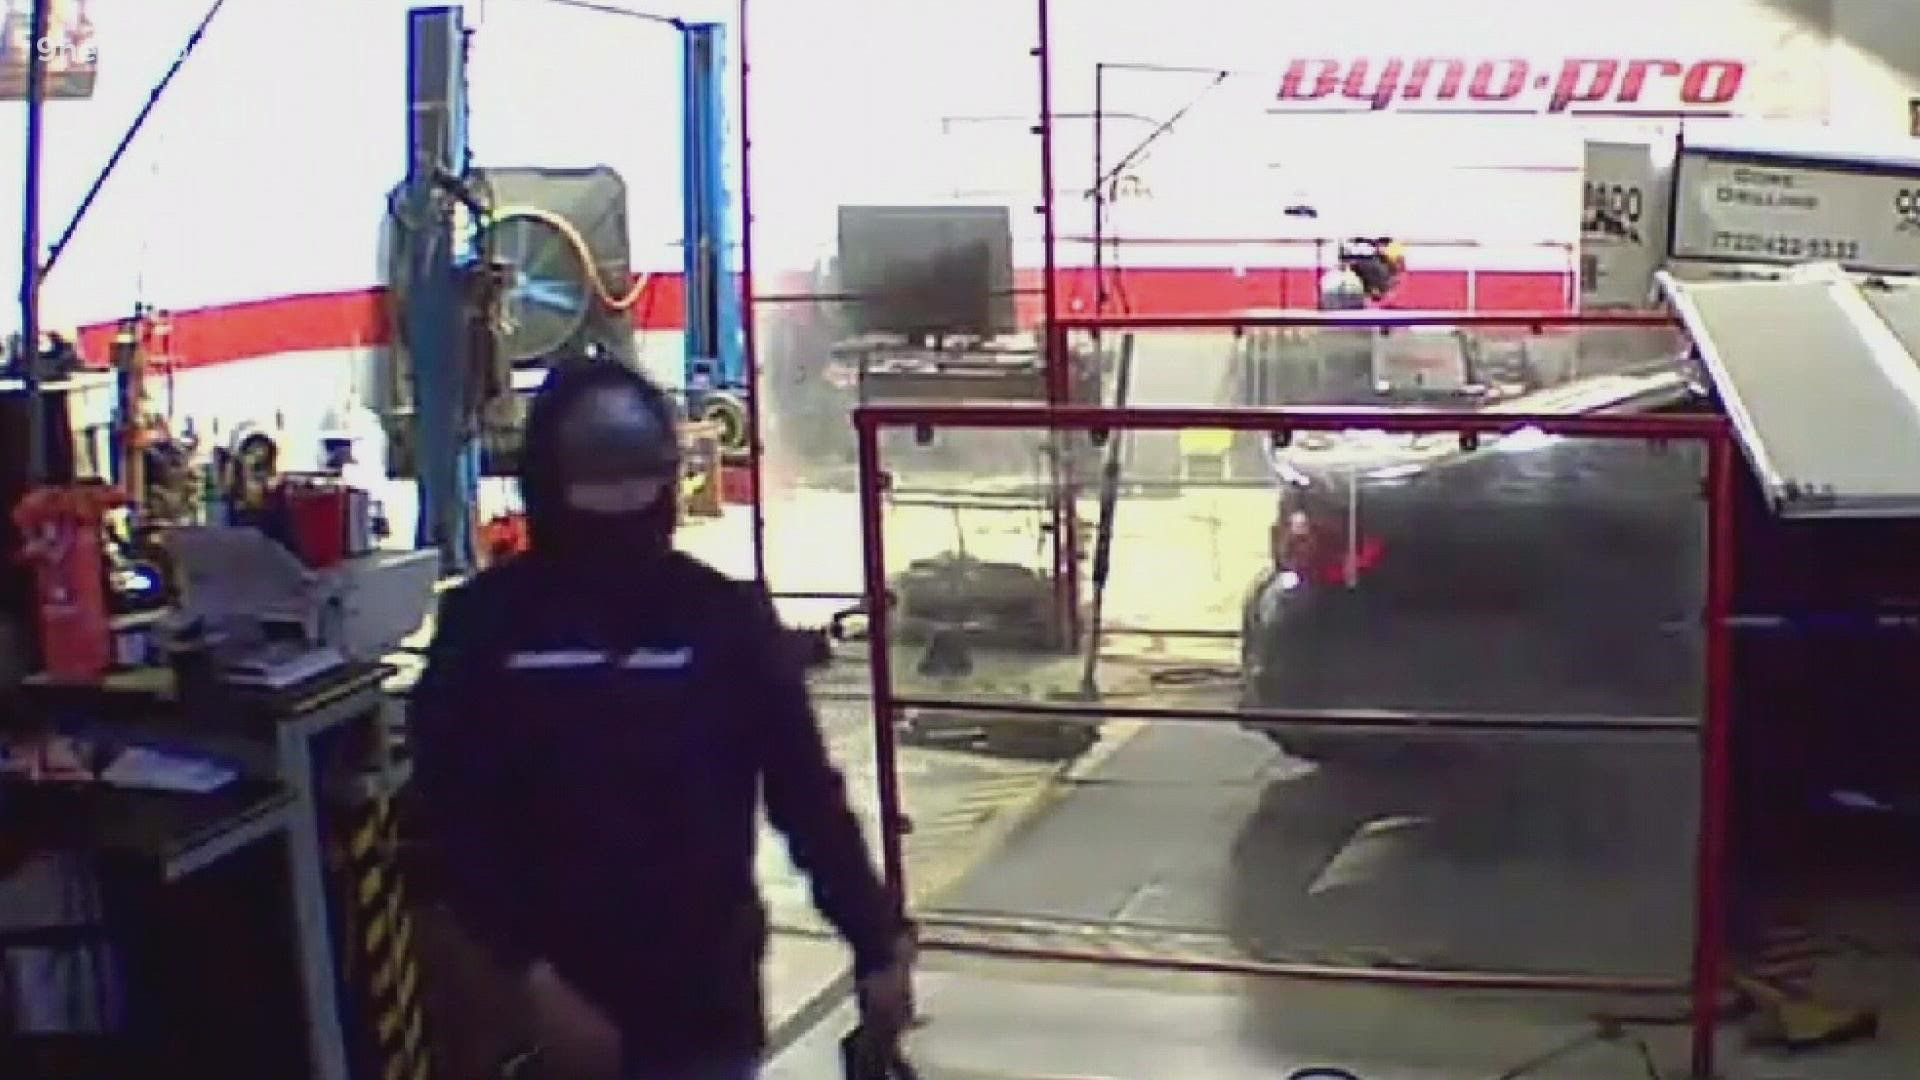 The suspects tried to break into an auto body shop in the 5900-block of Marion Drive.